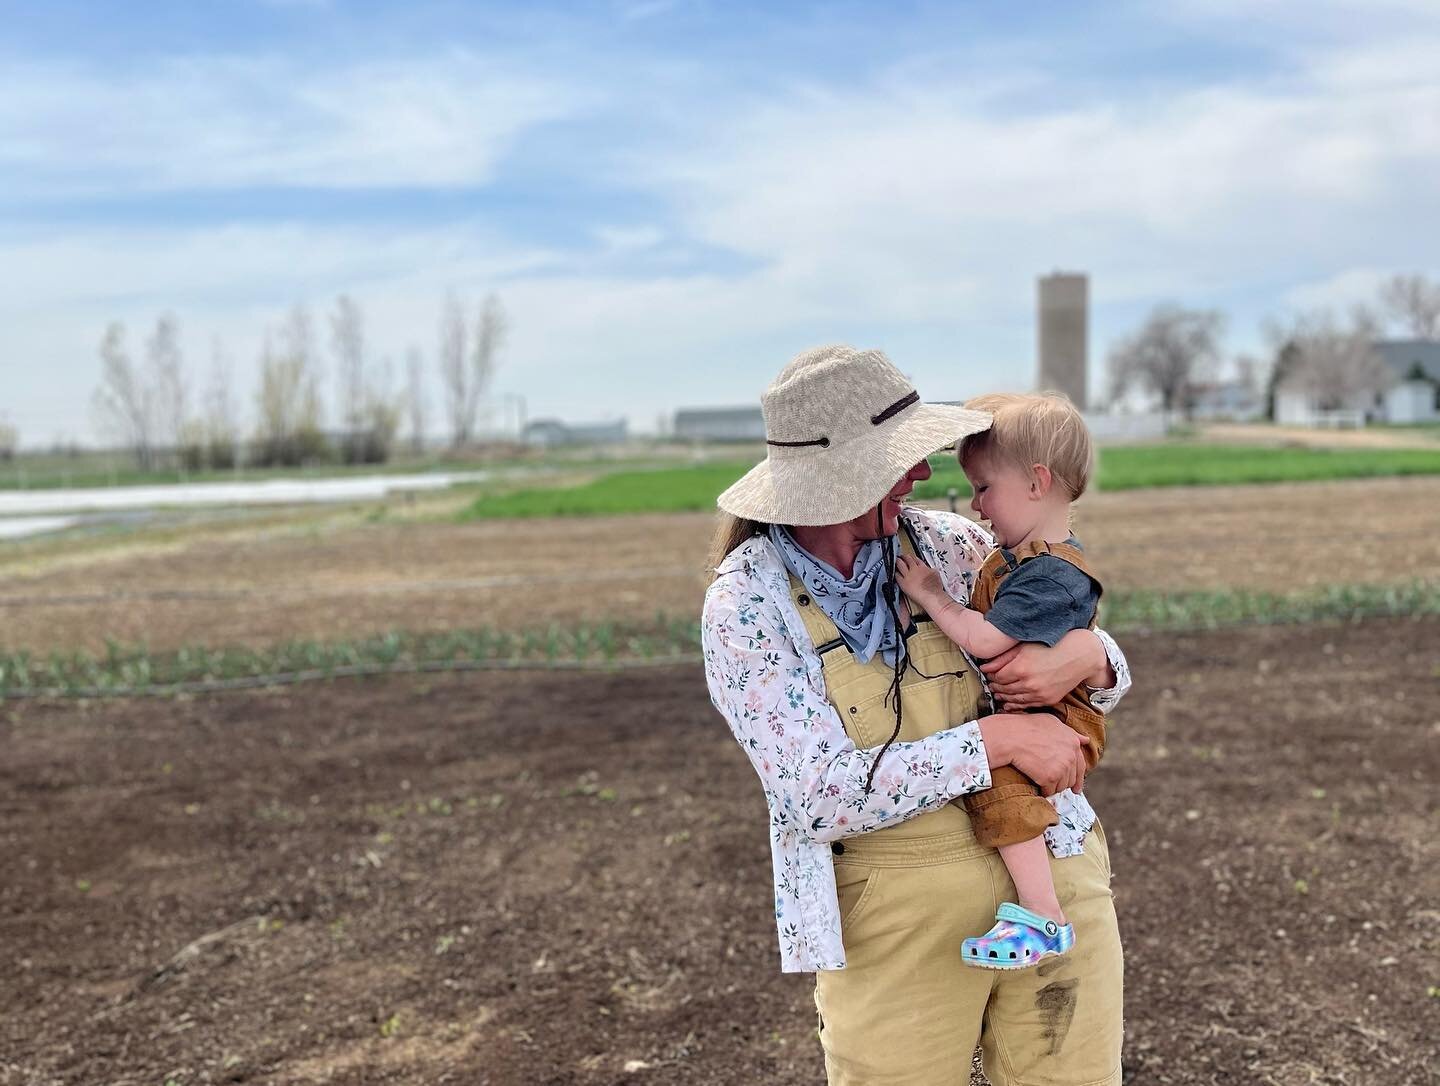 On Tuesdays, we wear overalls!

These days, we are out in the fields prepping beds, spreading compost and trying to get all the spring seeds and plants in ground. When markets start (this Sunday!!), we lose two days in the field due to harvesting/pac